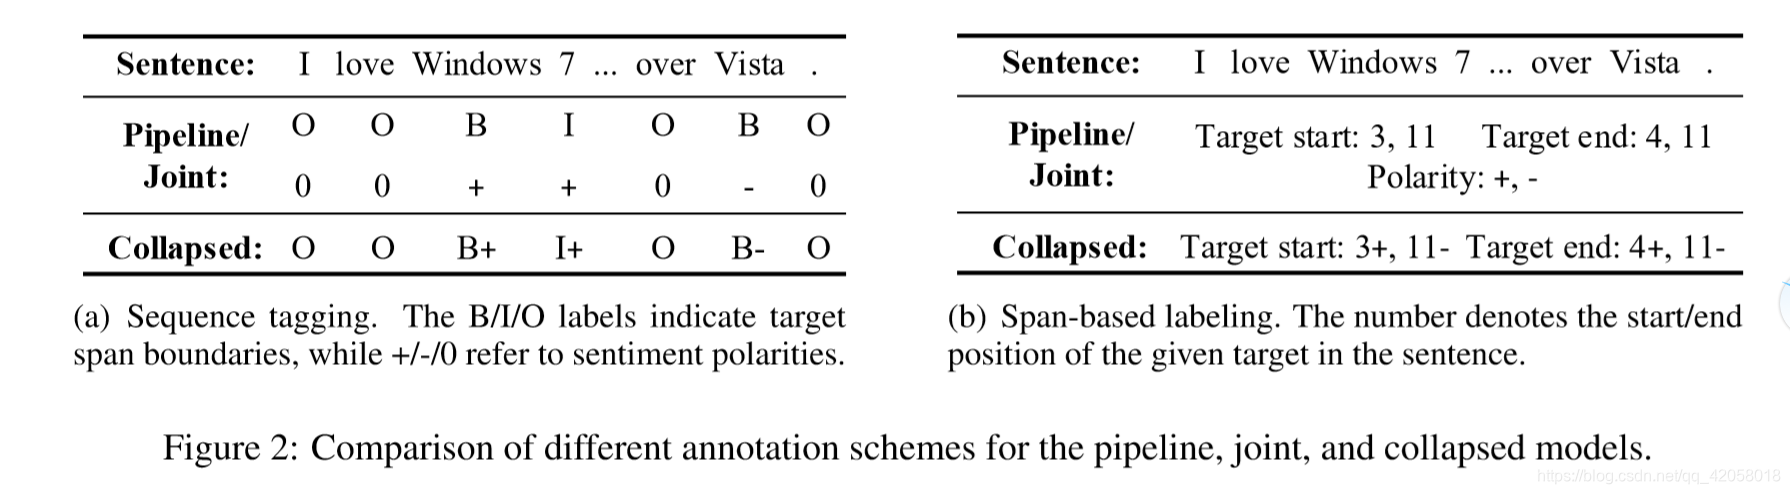 Acl19 Open Domaintargeted Sentiment Analysis Via Span Based Extraction And Classiﬁcation Thefetter的博客 Csdn博客